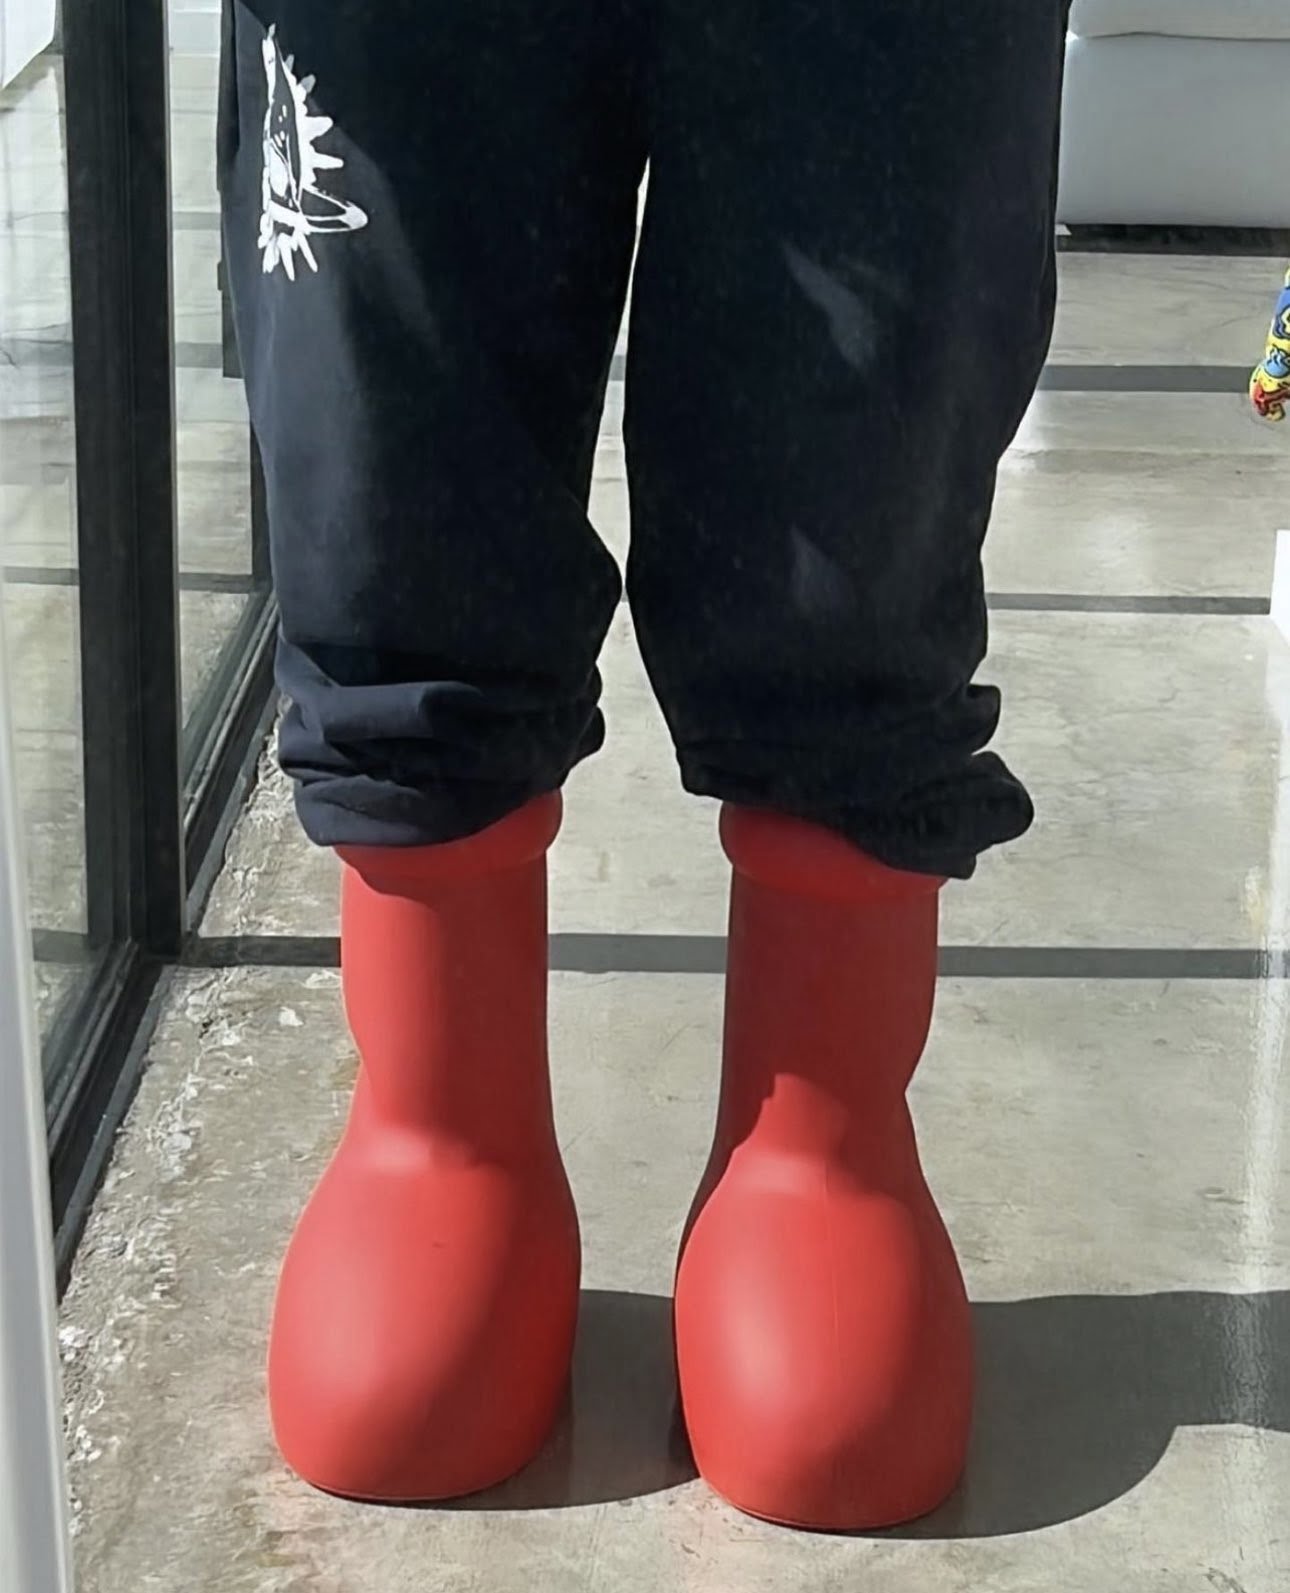 MSCHF Big Red Boots: Interesting red boots from MSCHF on the way - Vo ...